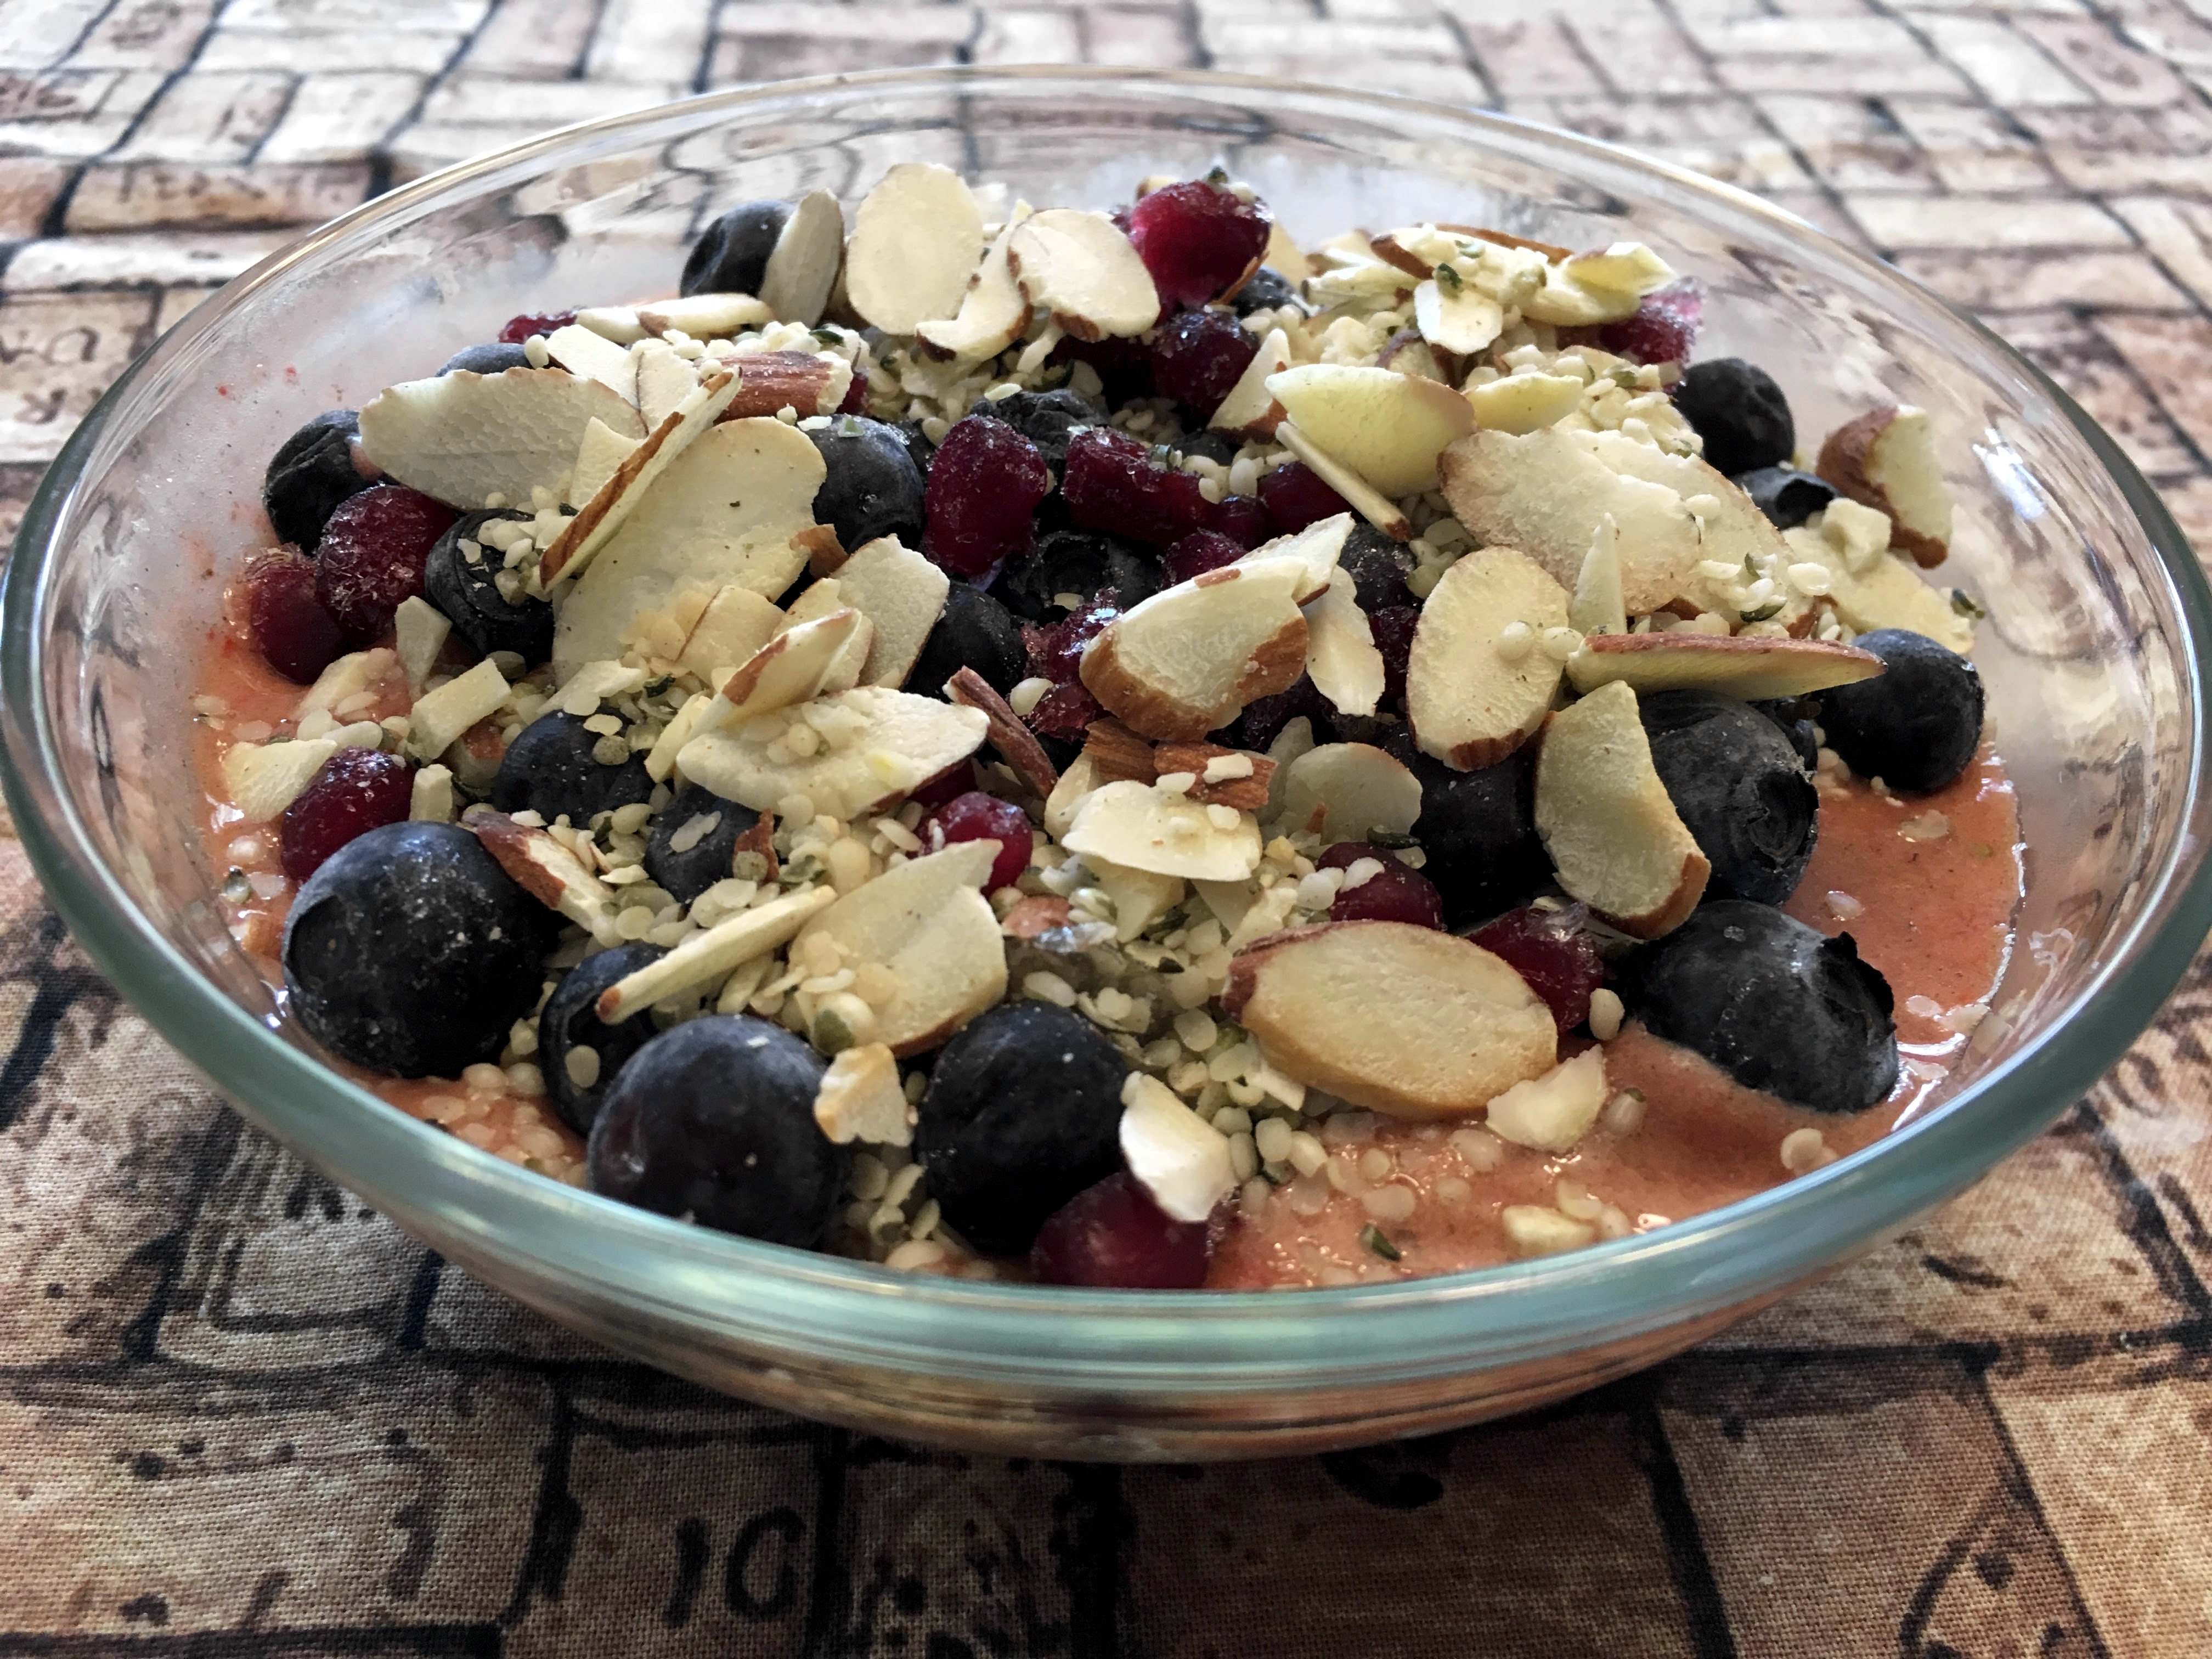 A glass bowl containing a pink smoothie topped with a jumble of nuts, seeds, blueberries, and pomegranate.